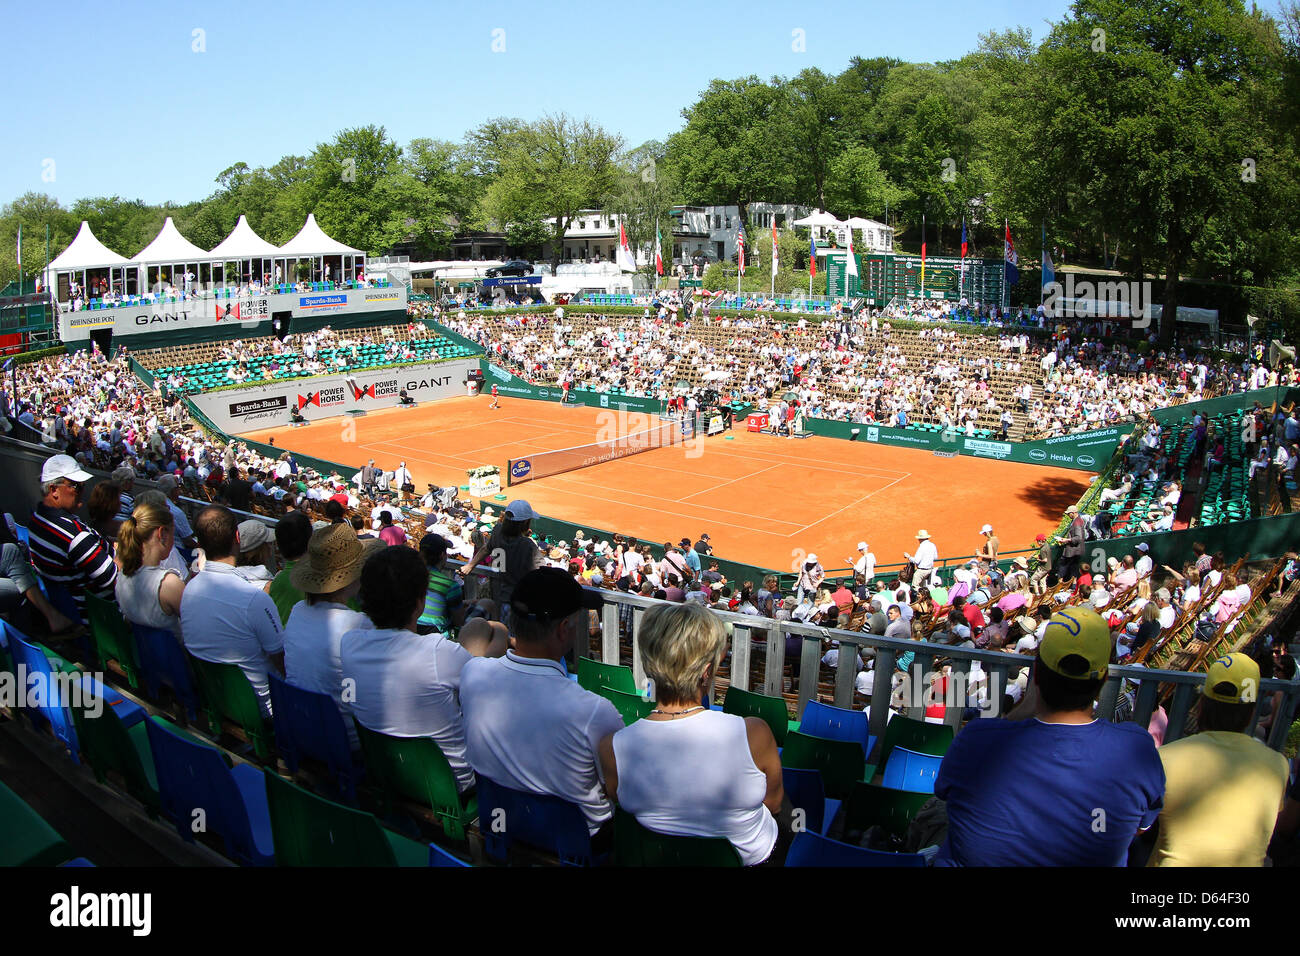 The Rochusclub tennis court is pictured during the finale of the Tennis  World Team Cup between Czechia's Stepanek and Serbia's Troicki in  Duesseldorf, Germany, 26 May 2012. Photo: KEVIN KUREK Stock Photo - Alamy